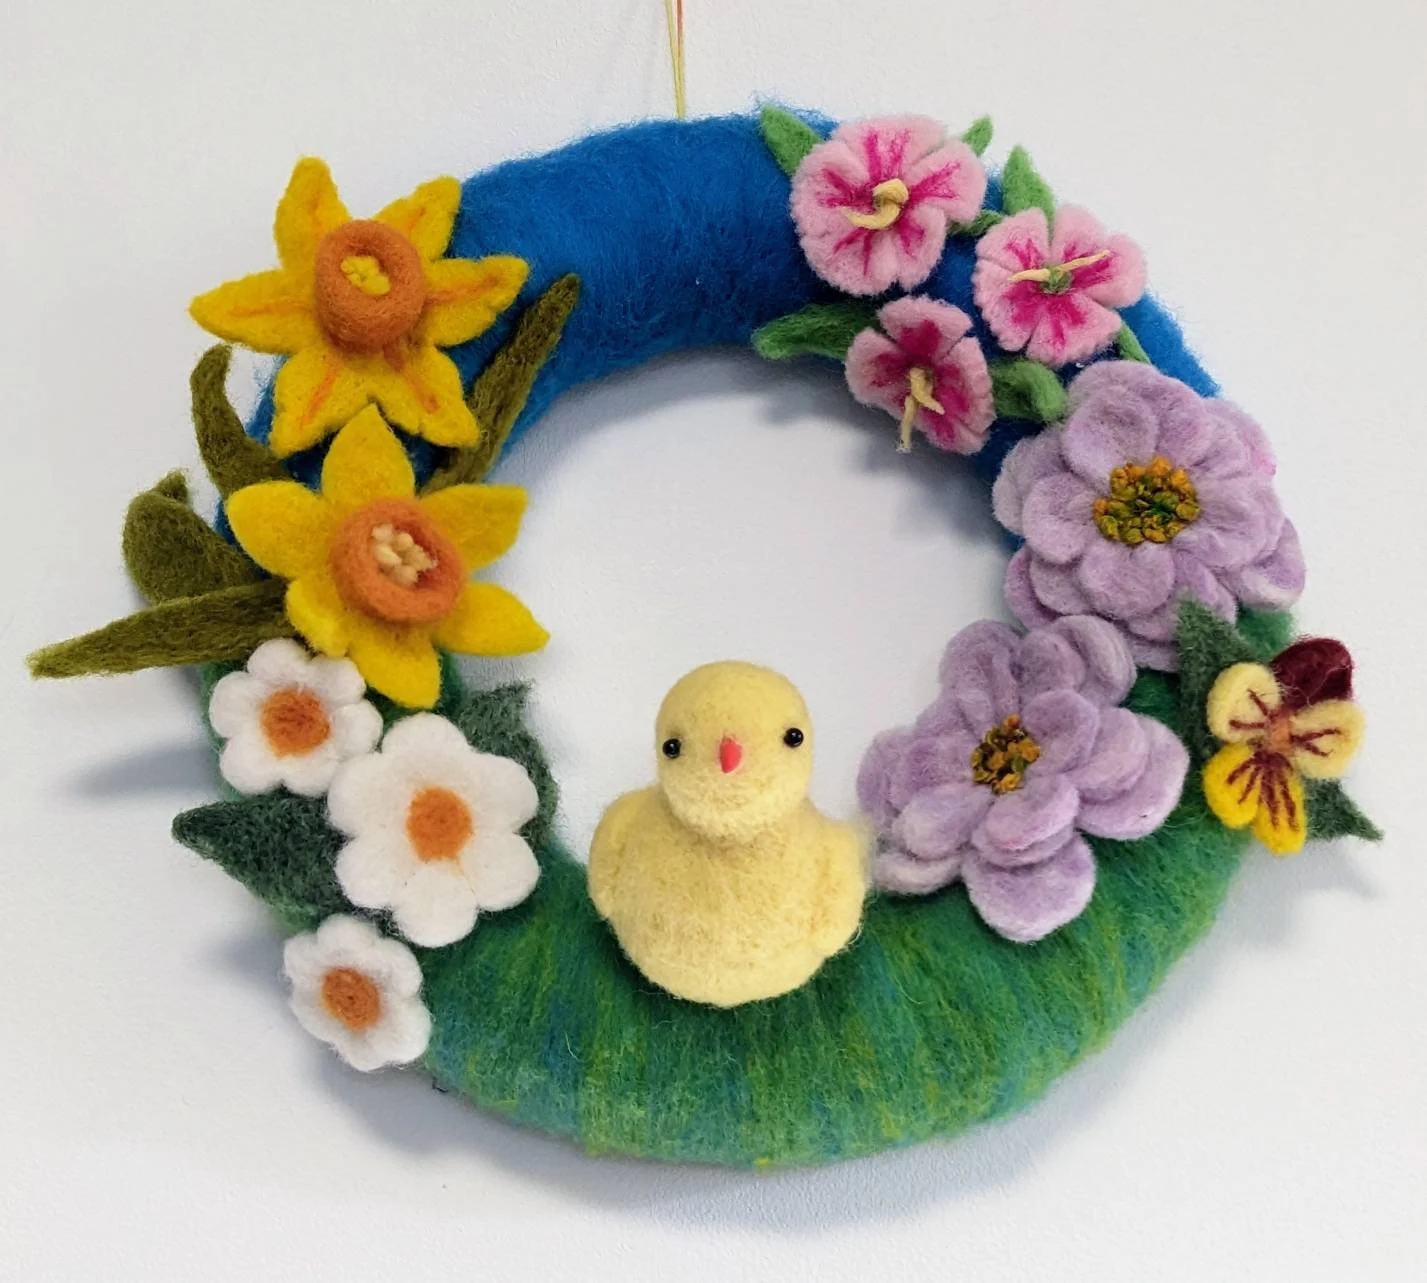 colourful easter wreath with chicks and flowers